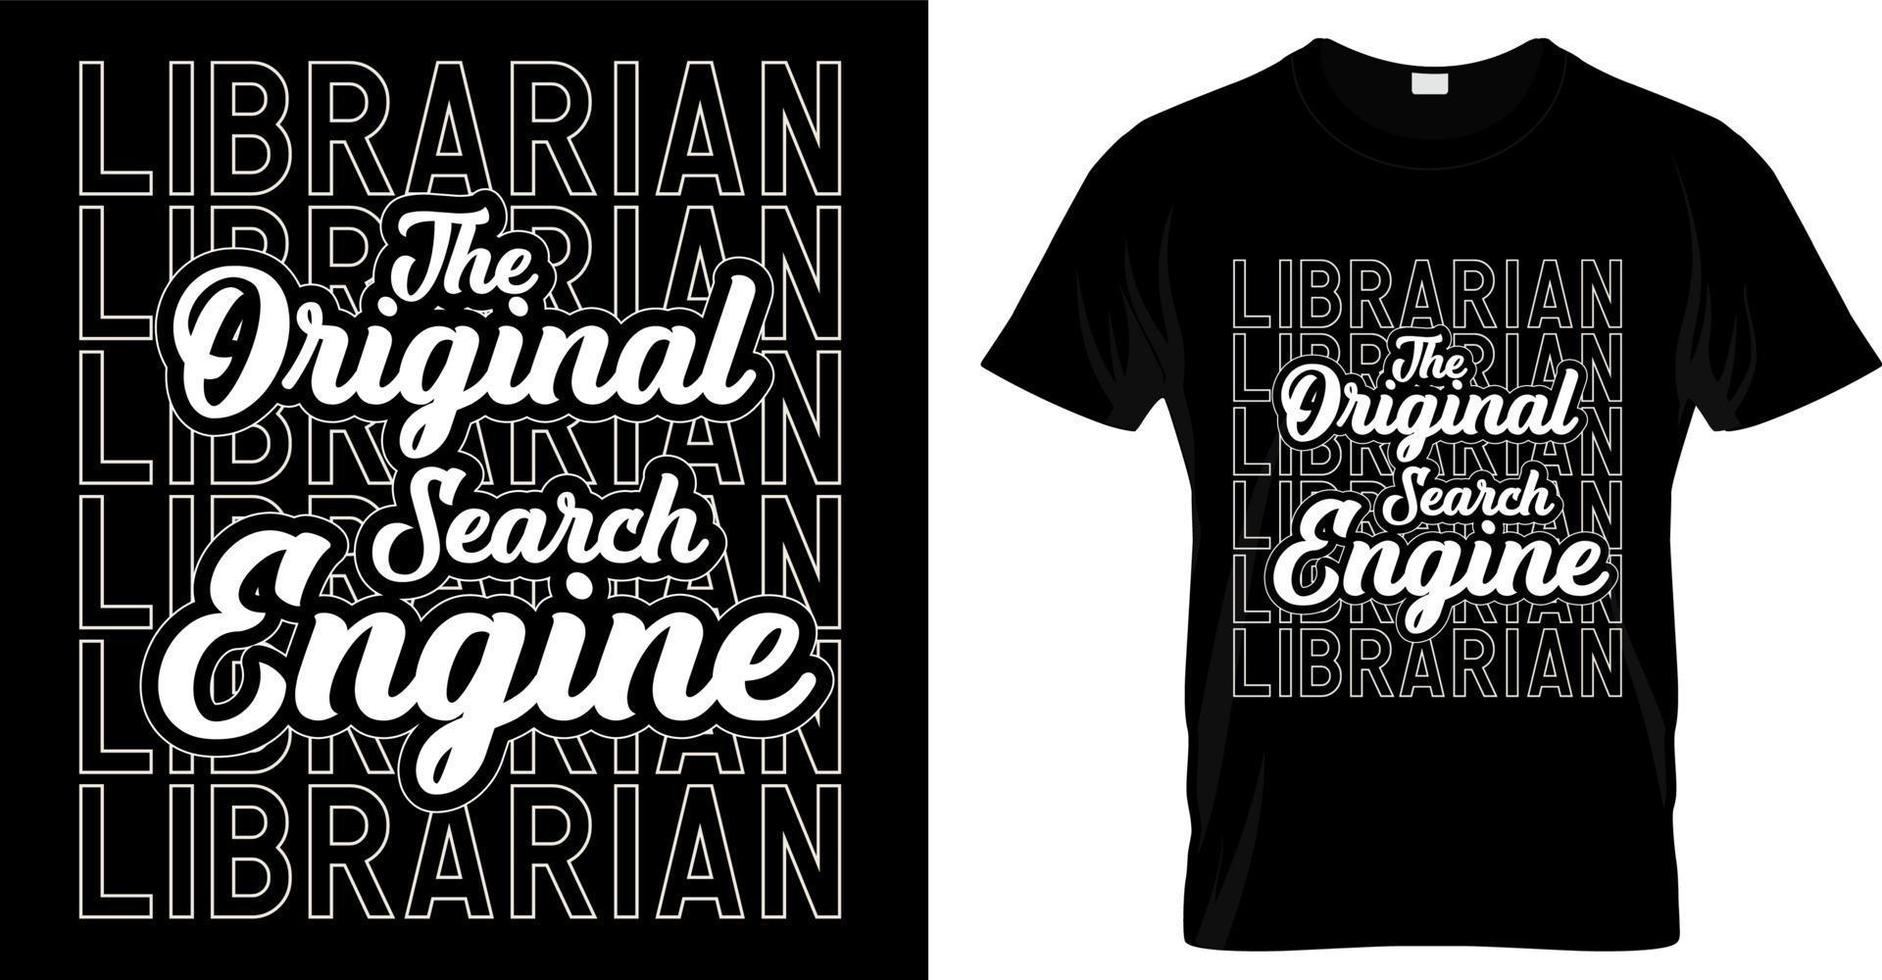 Librarian the original search engine. Motivation hand drawn lettering quote about books and reading. Love reading book phrases vintage vector illustration. Perfect for t shirt, print, posters.